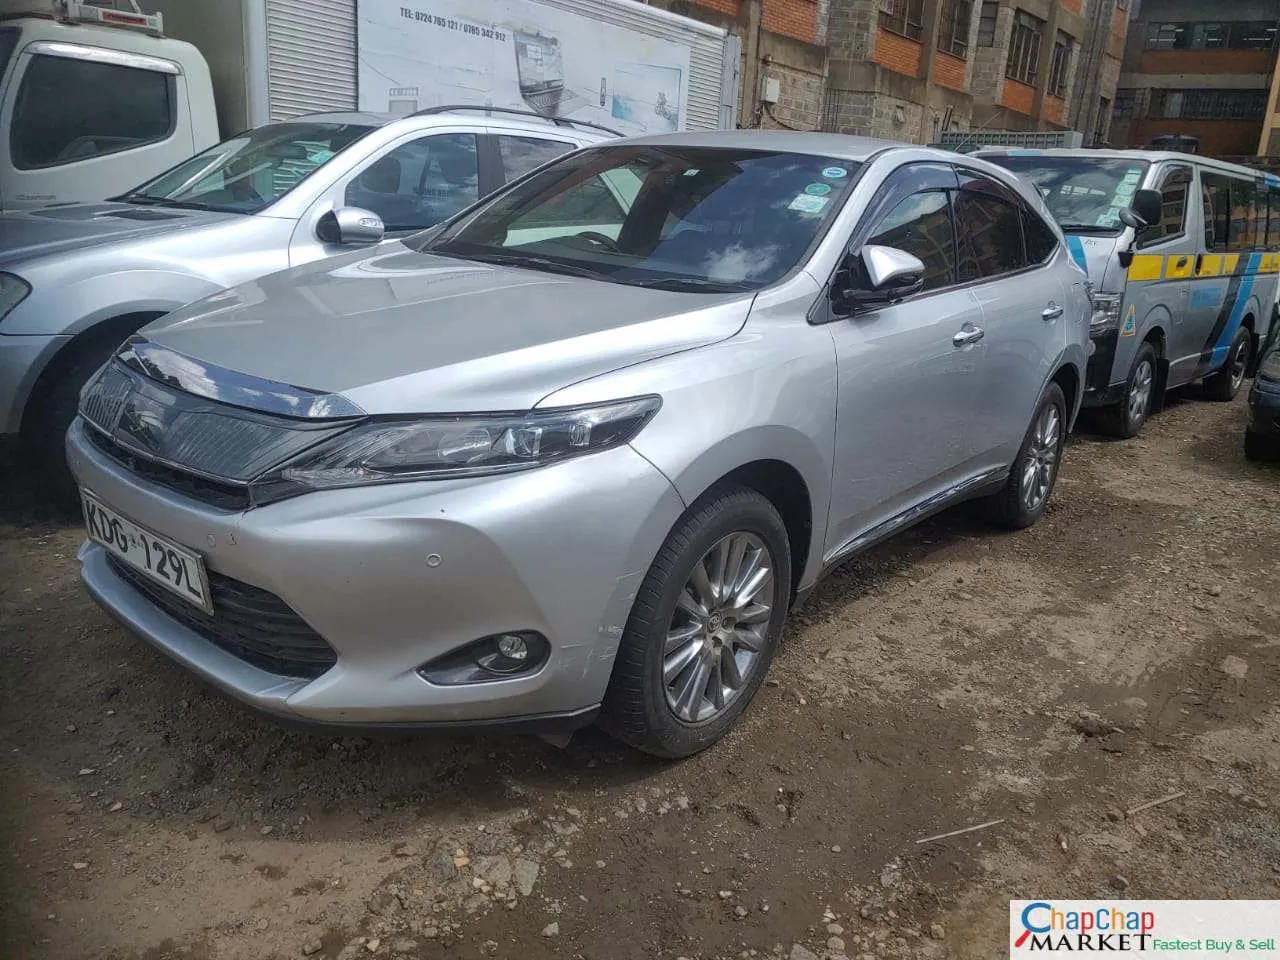 Toyota Harrier QUICK SALE 🔥 You Pay 30% Deposit Trade in OK EXCLUSIVE